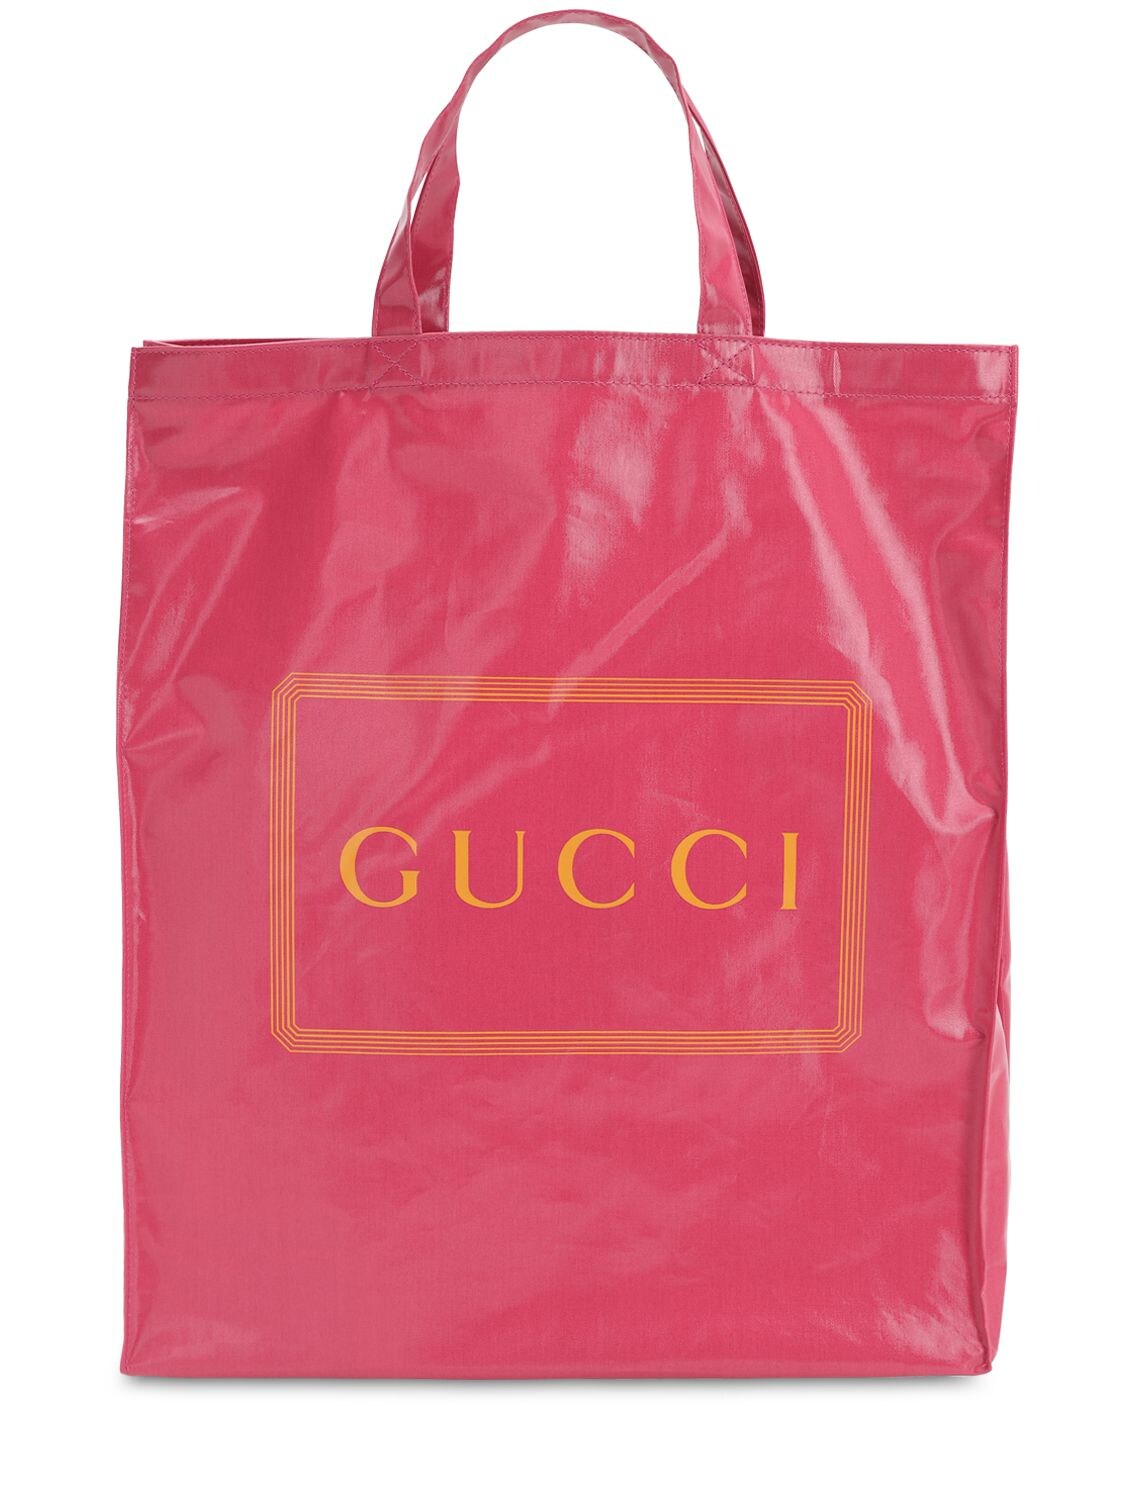 Gucci Logo Printed Coated Canvas Tote Bag In Pink | ModeSens